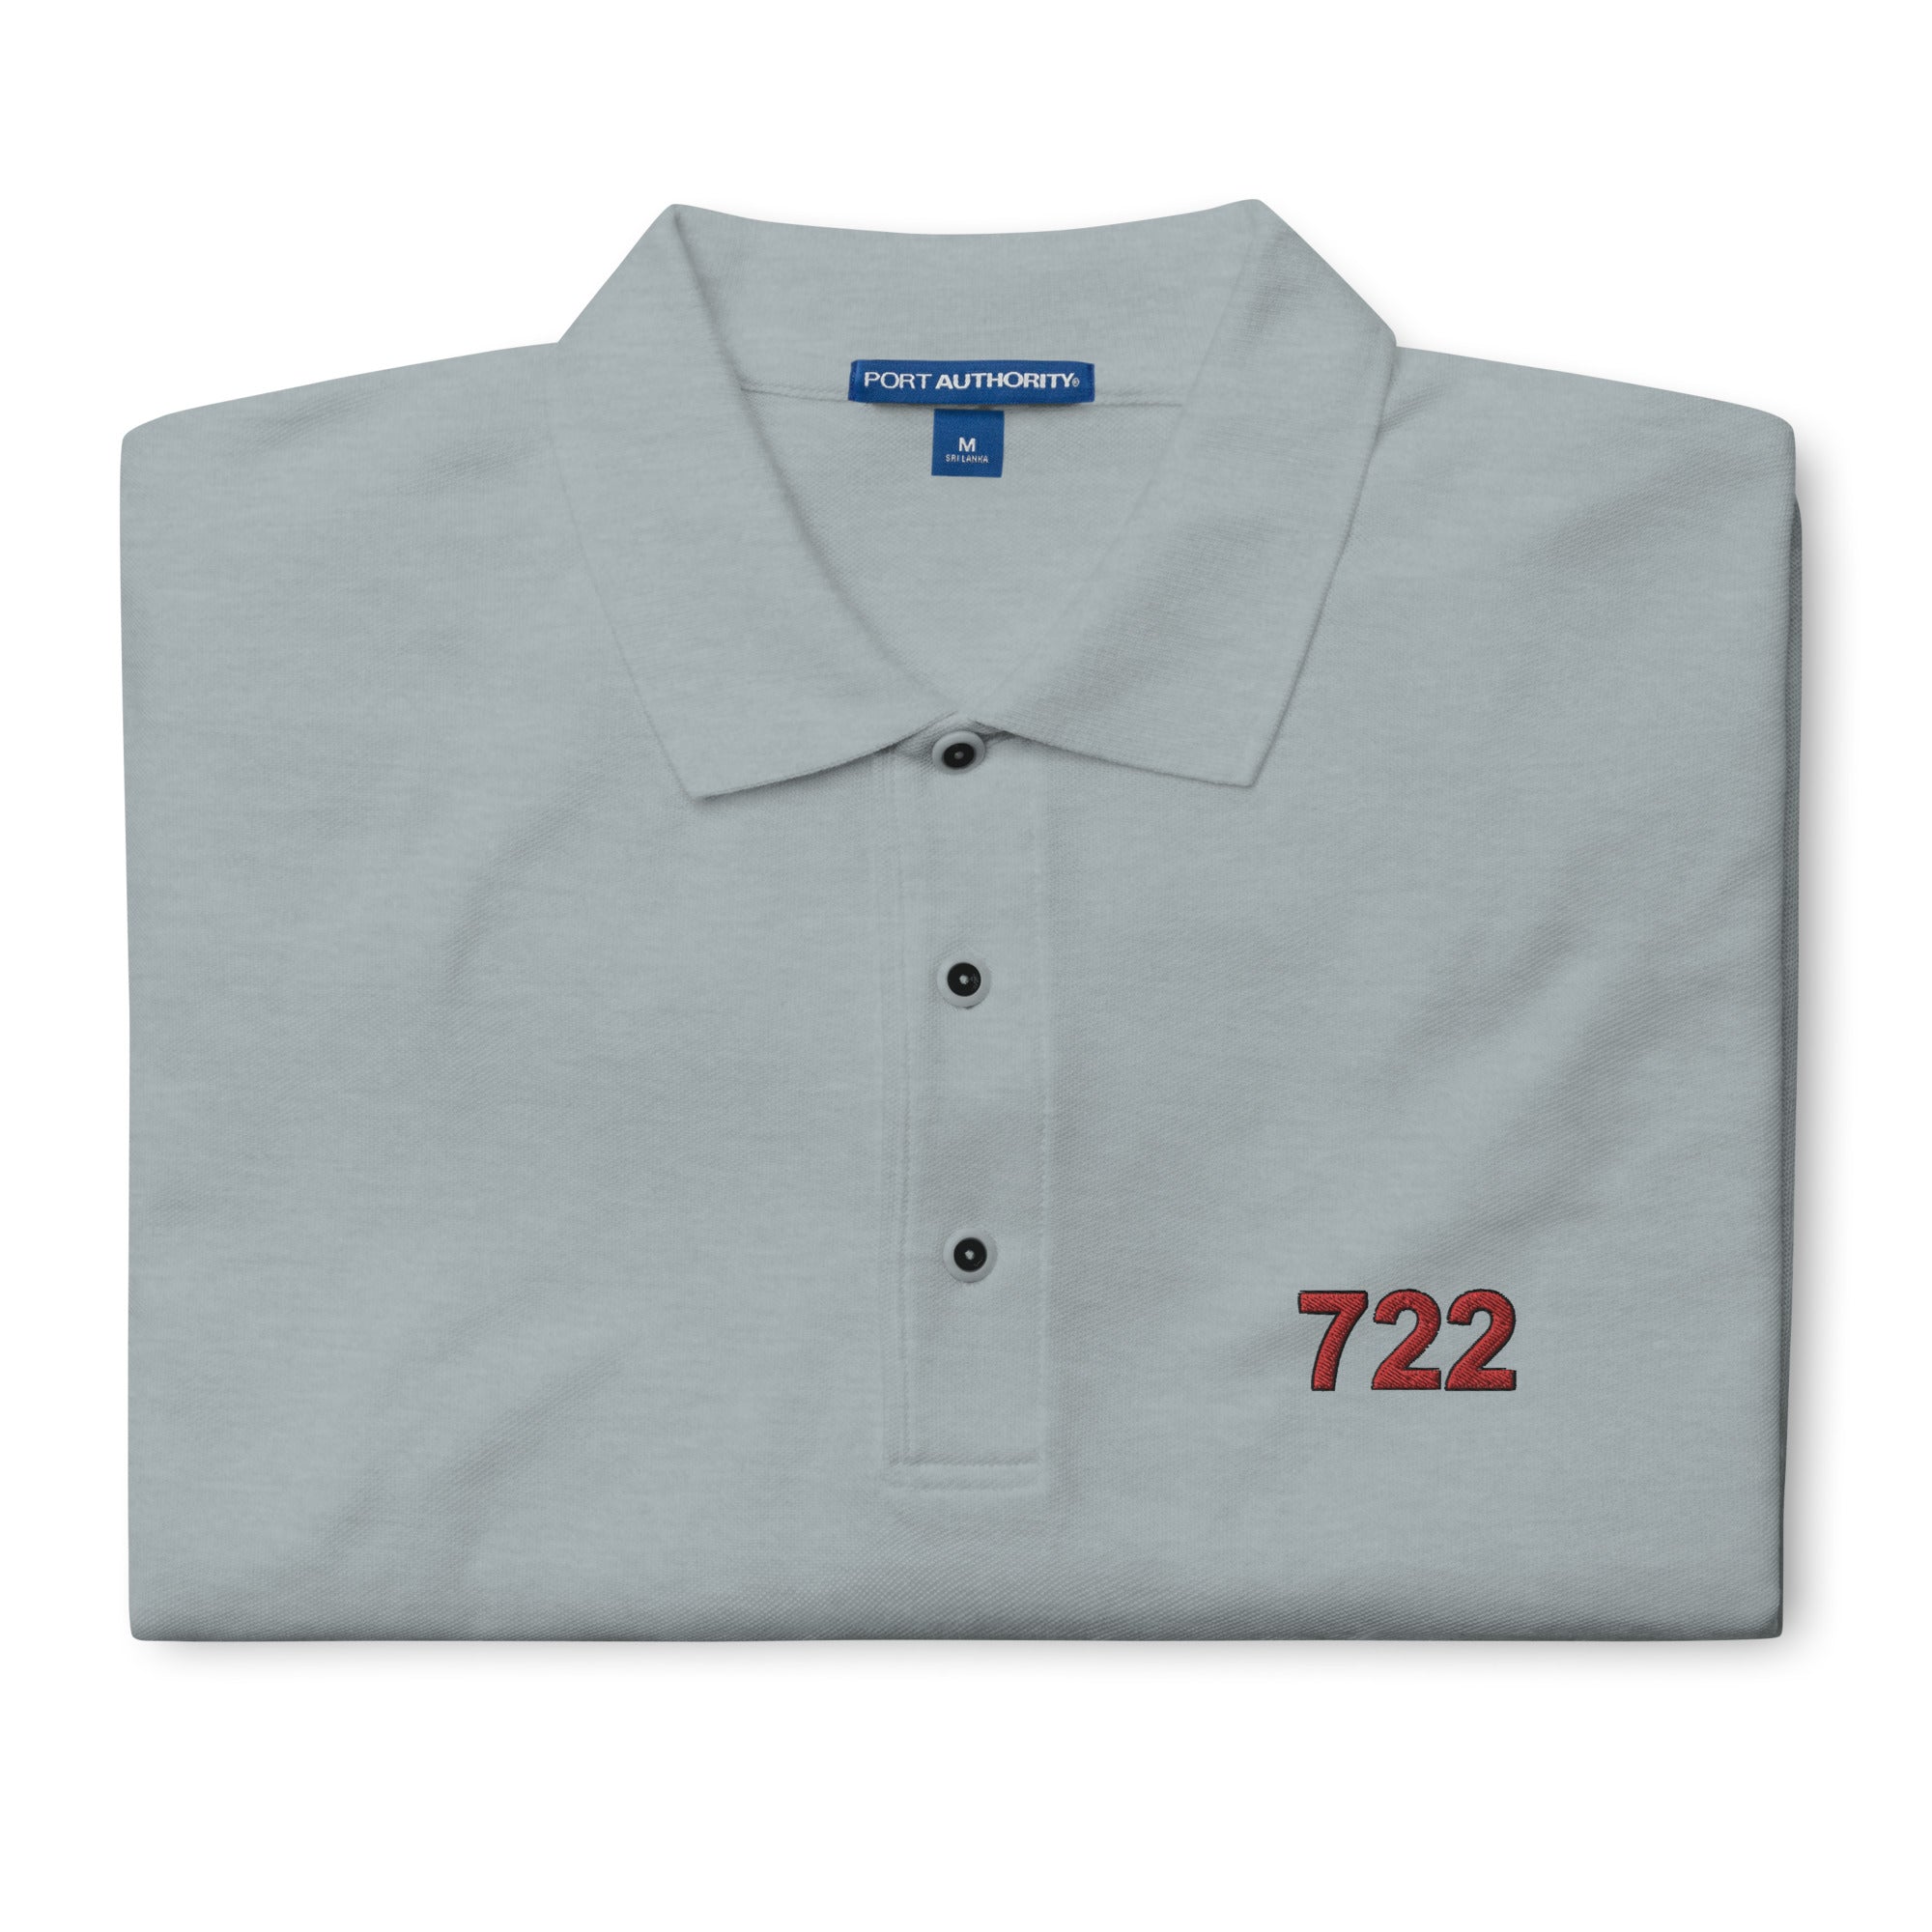 722: Stirling Moss at Mille Miglia 1955 Mercedes SLR light grey polo shirt front folded